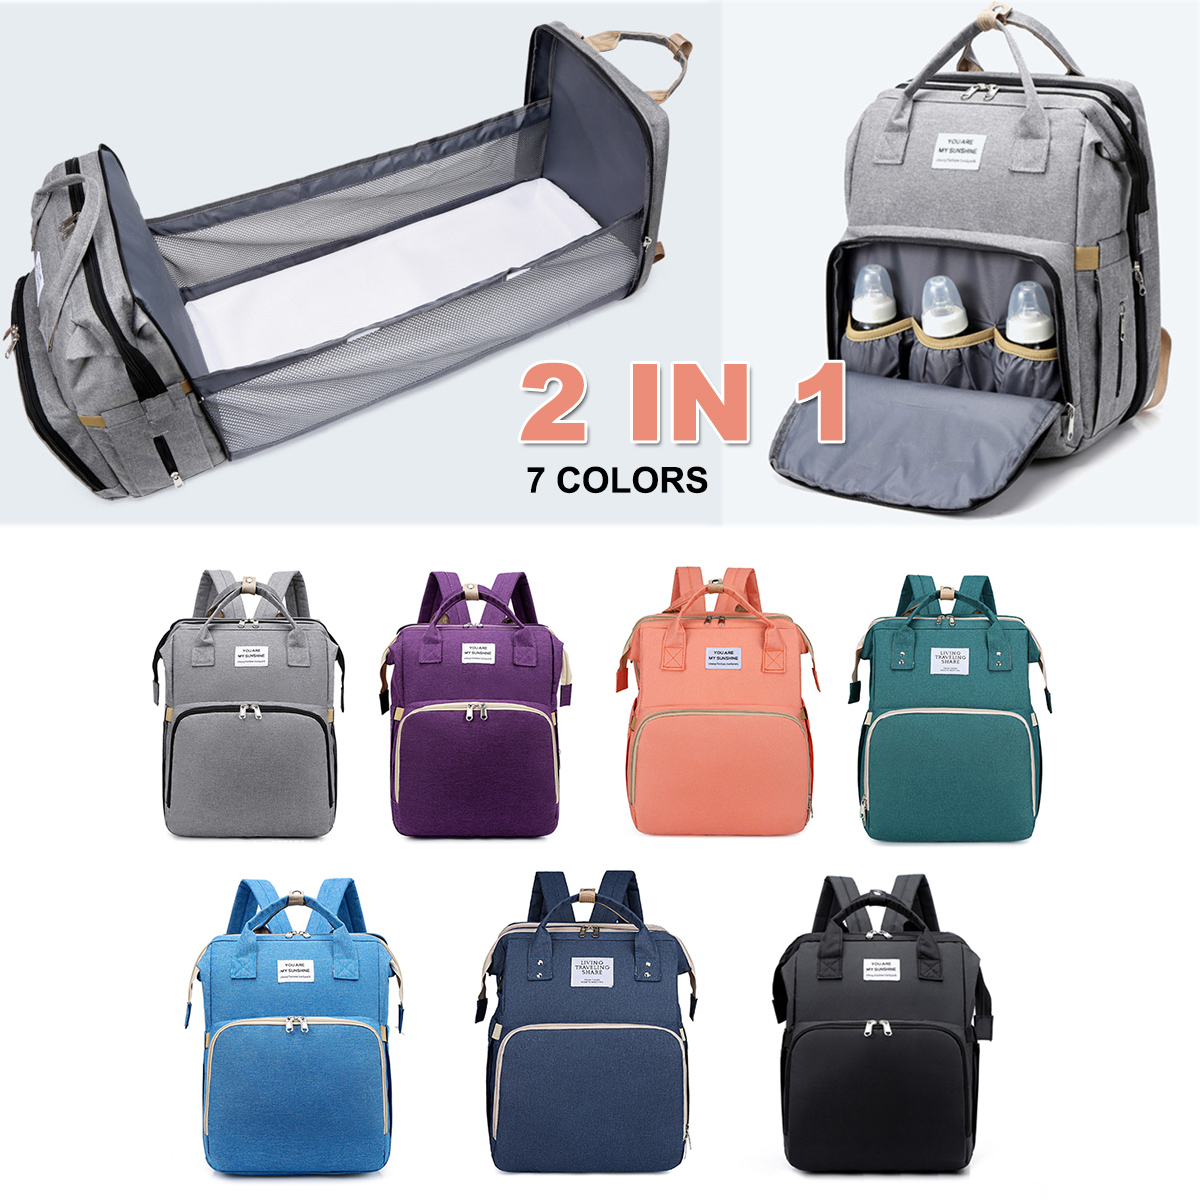 2-IN-1-Foldable-Diaper-Bag-Large-Capacity-Baby-Crib-Backpack-Nappy-Mummy-Bags-For-Mom-Outdoors-Trave-1826517-2